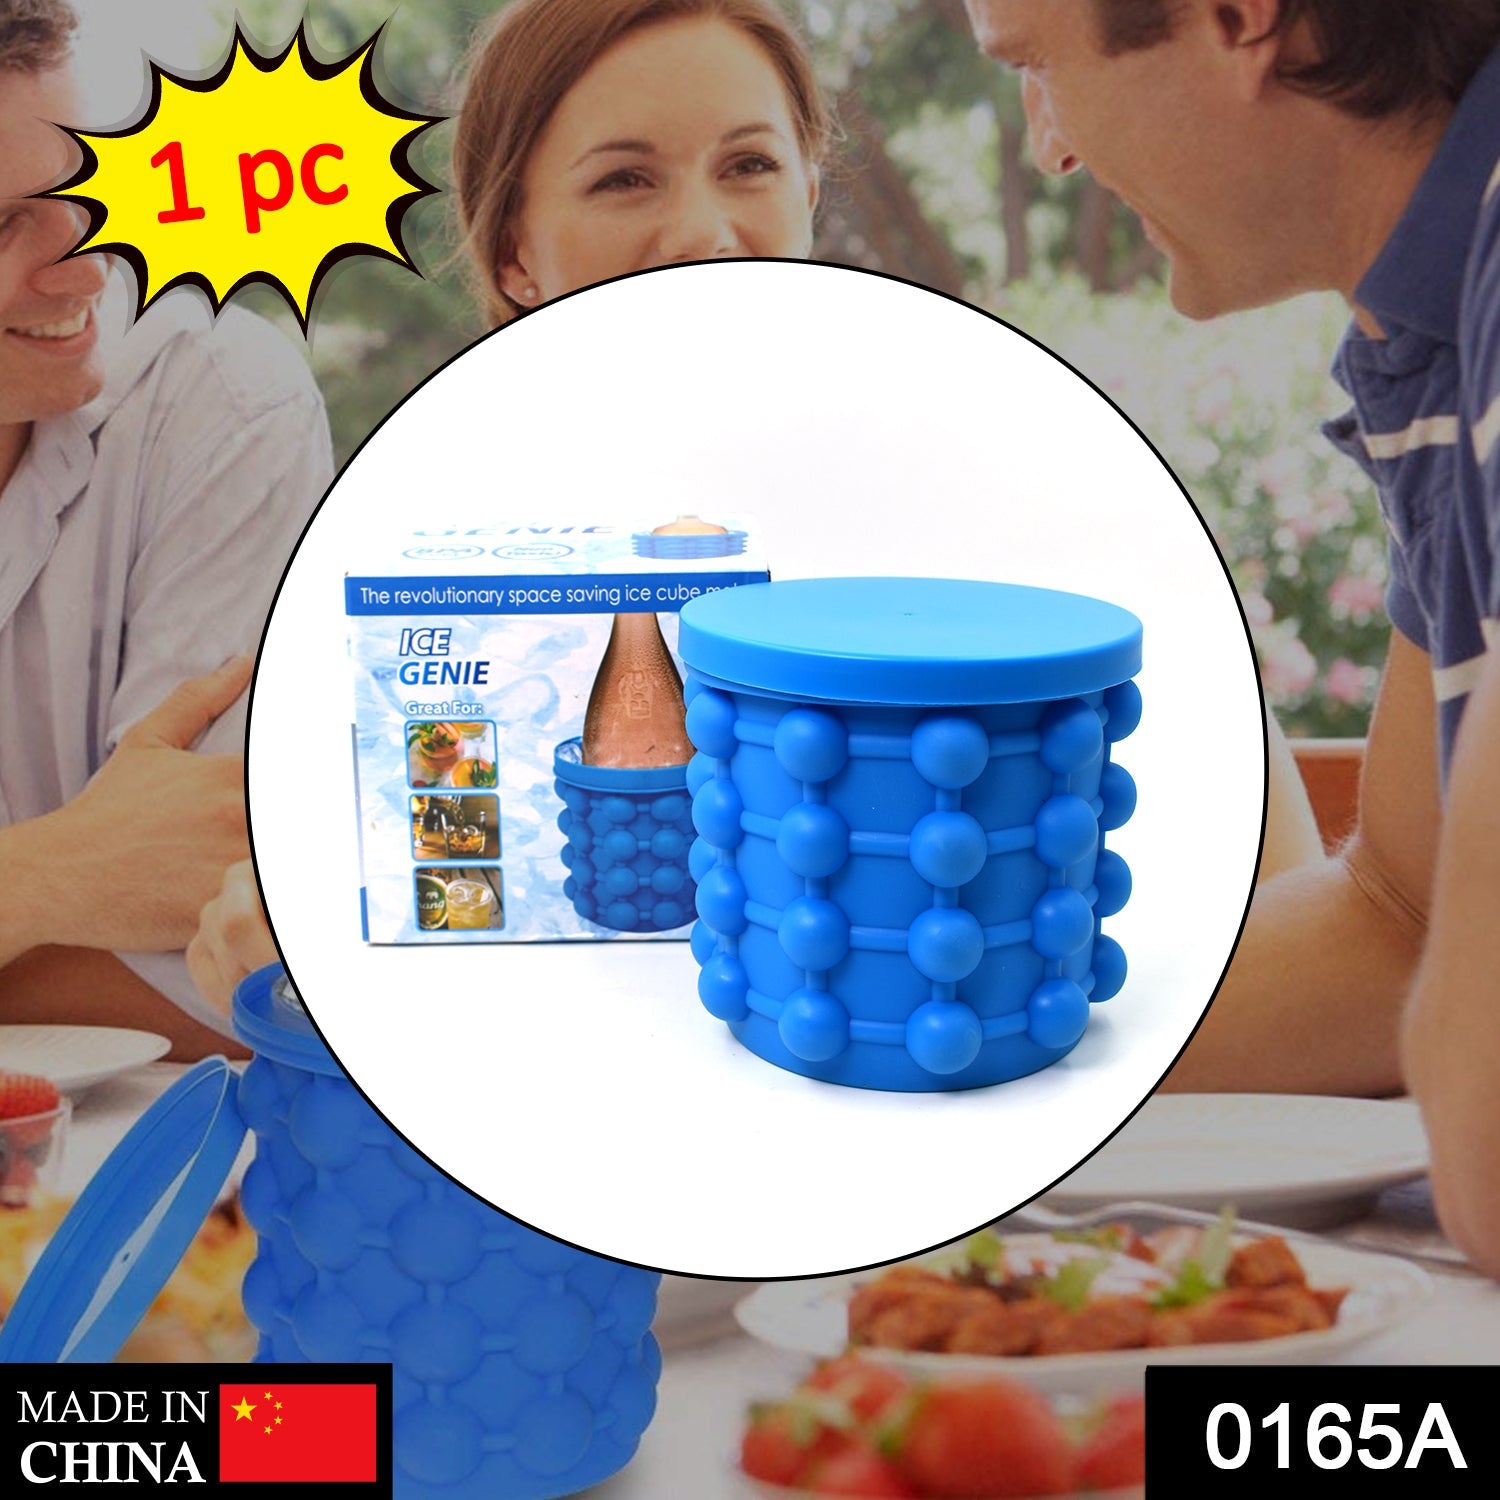 0165A Ice Cube Maker Used For Making Ice At Home And Anywhere Easily. DeoDap